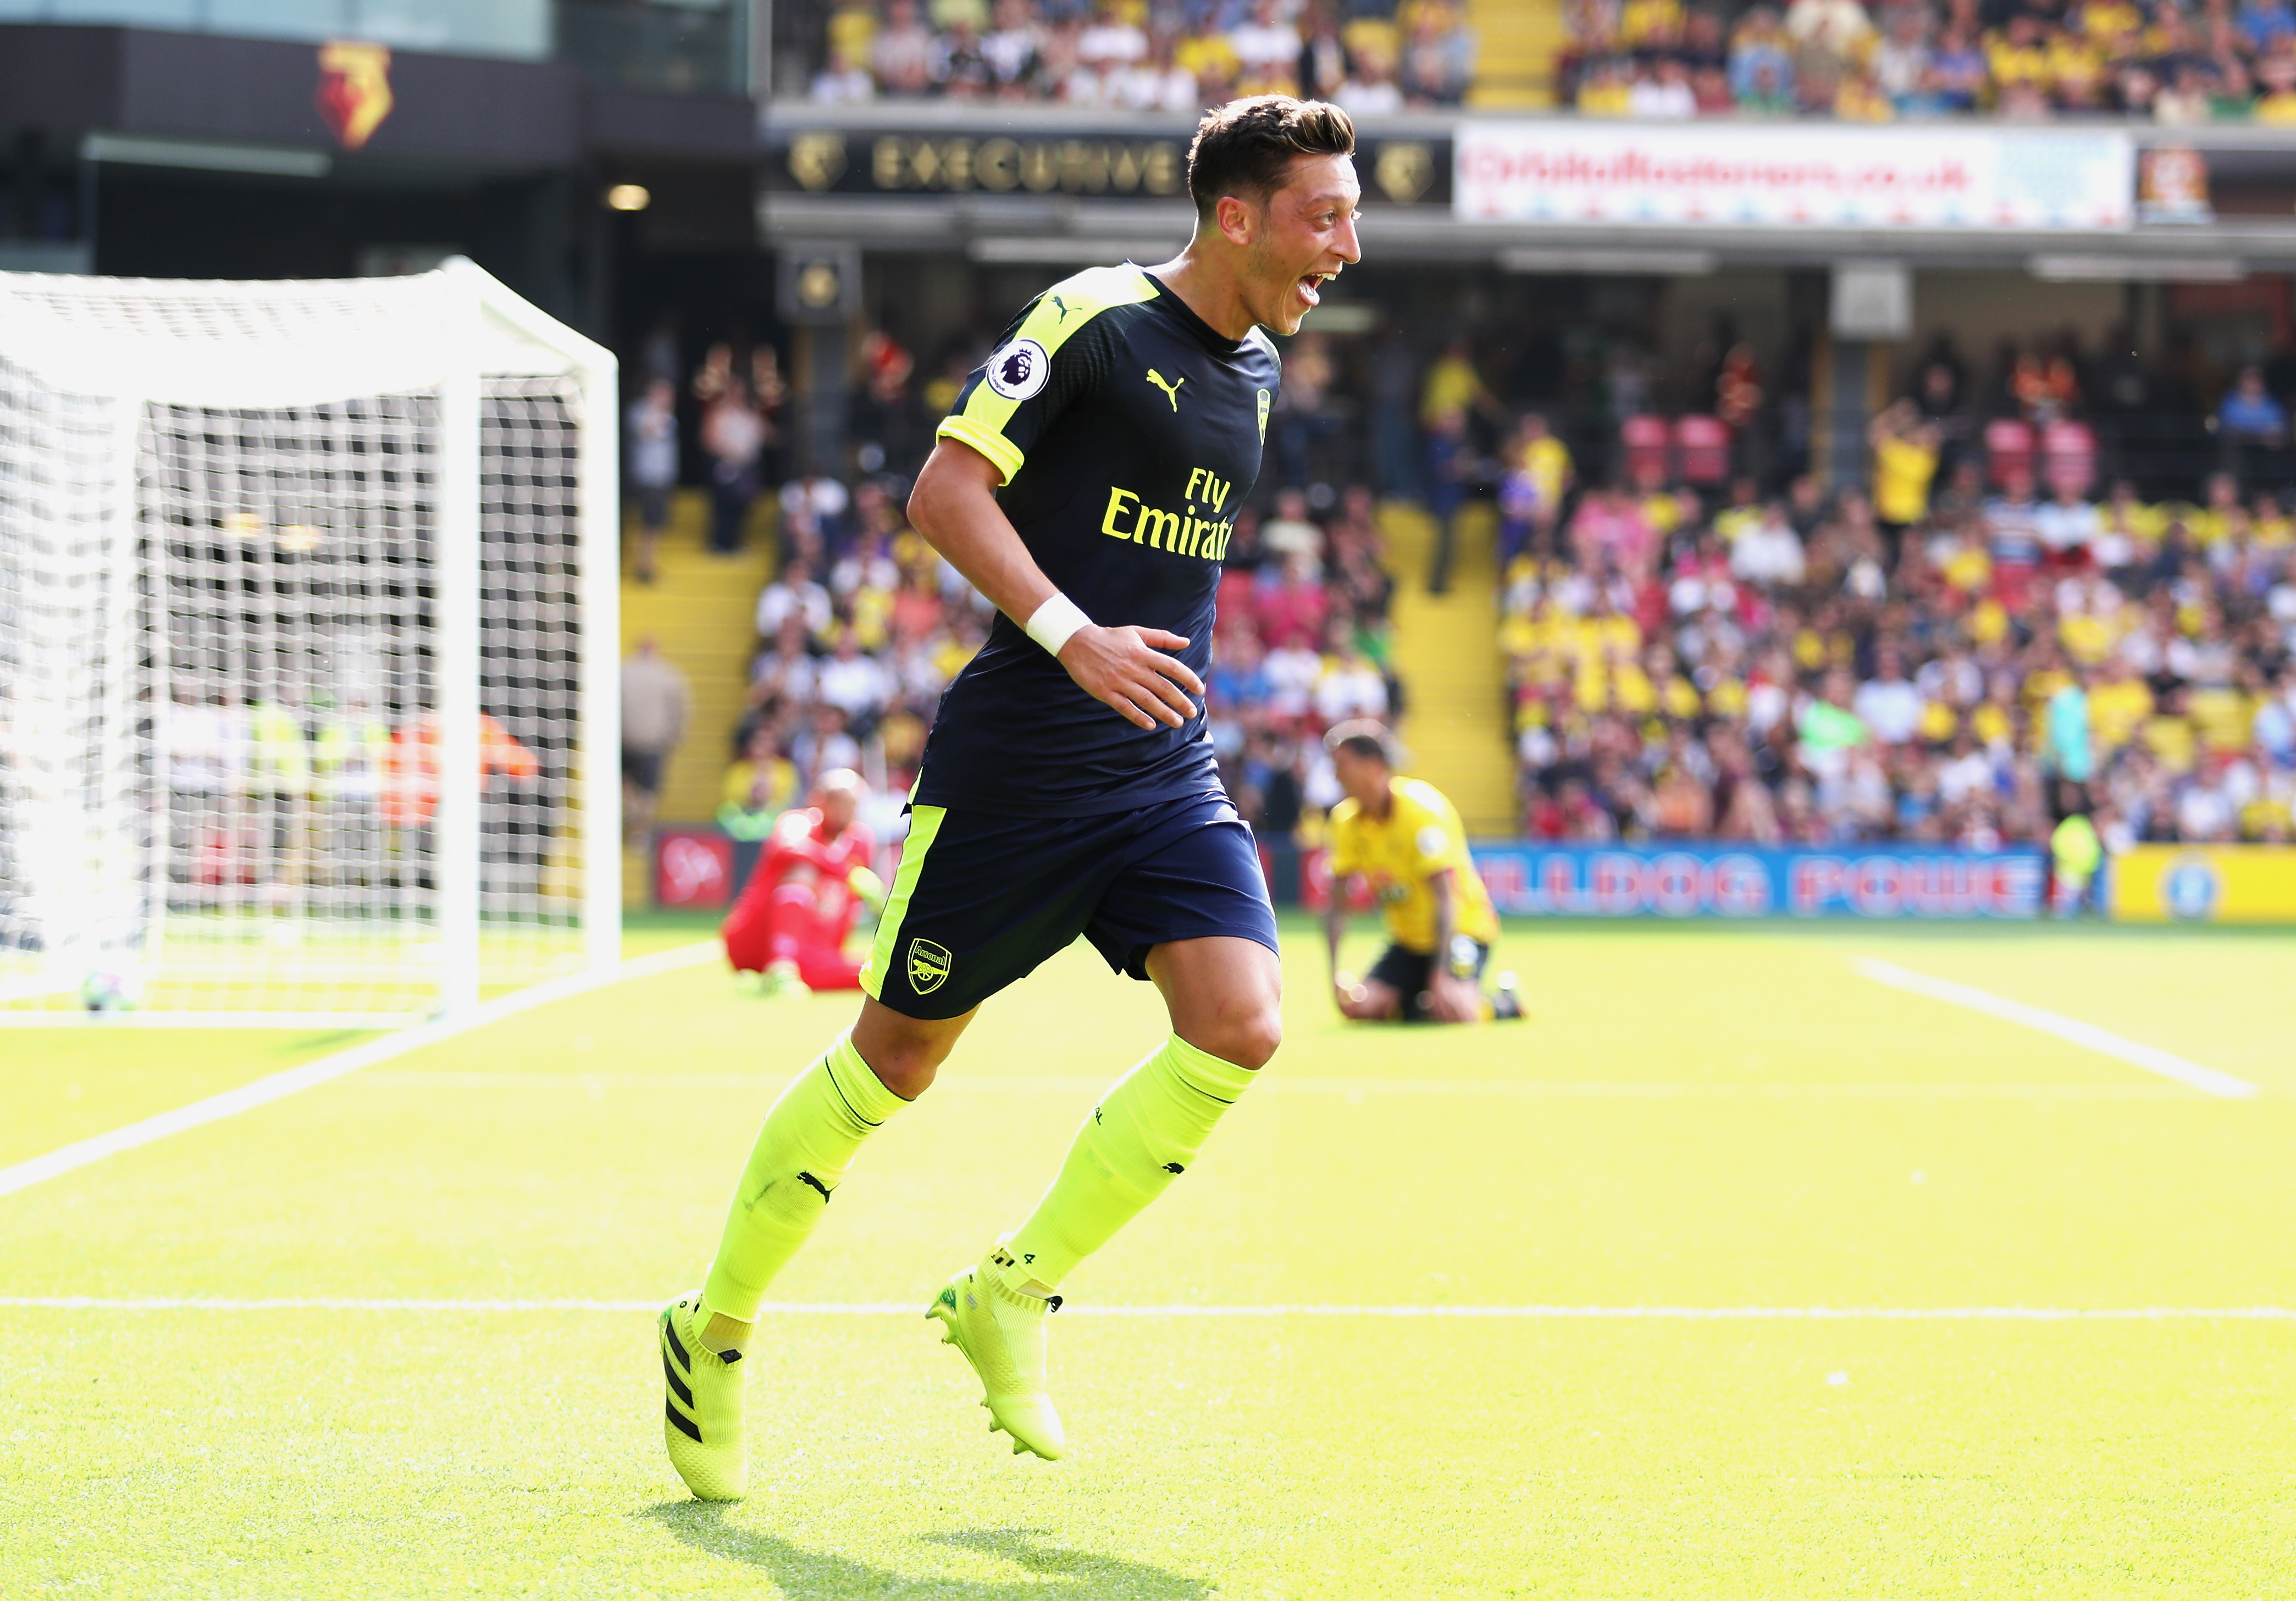 WATFORD, ENGLAND - AUGUST 27: Mesut Ozil of Arsenal celebrates scoring his sides third goal during the Premier League match between Watford and Arsenal at Vicarage Road on August 27, 2016 in Watford, England.  (Photo by Christopher Lee/Getty Images)